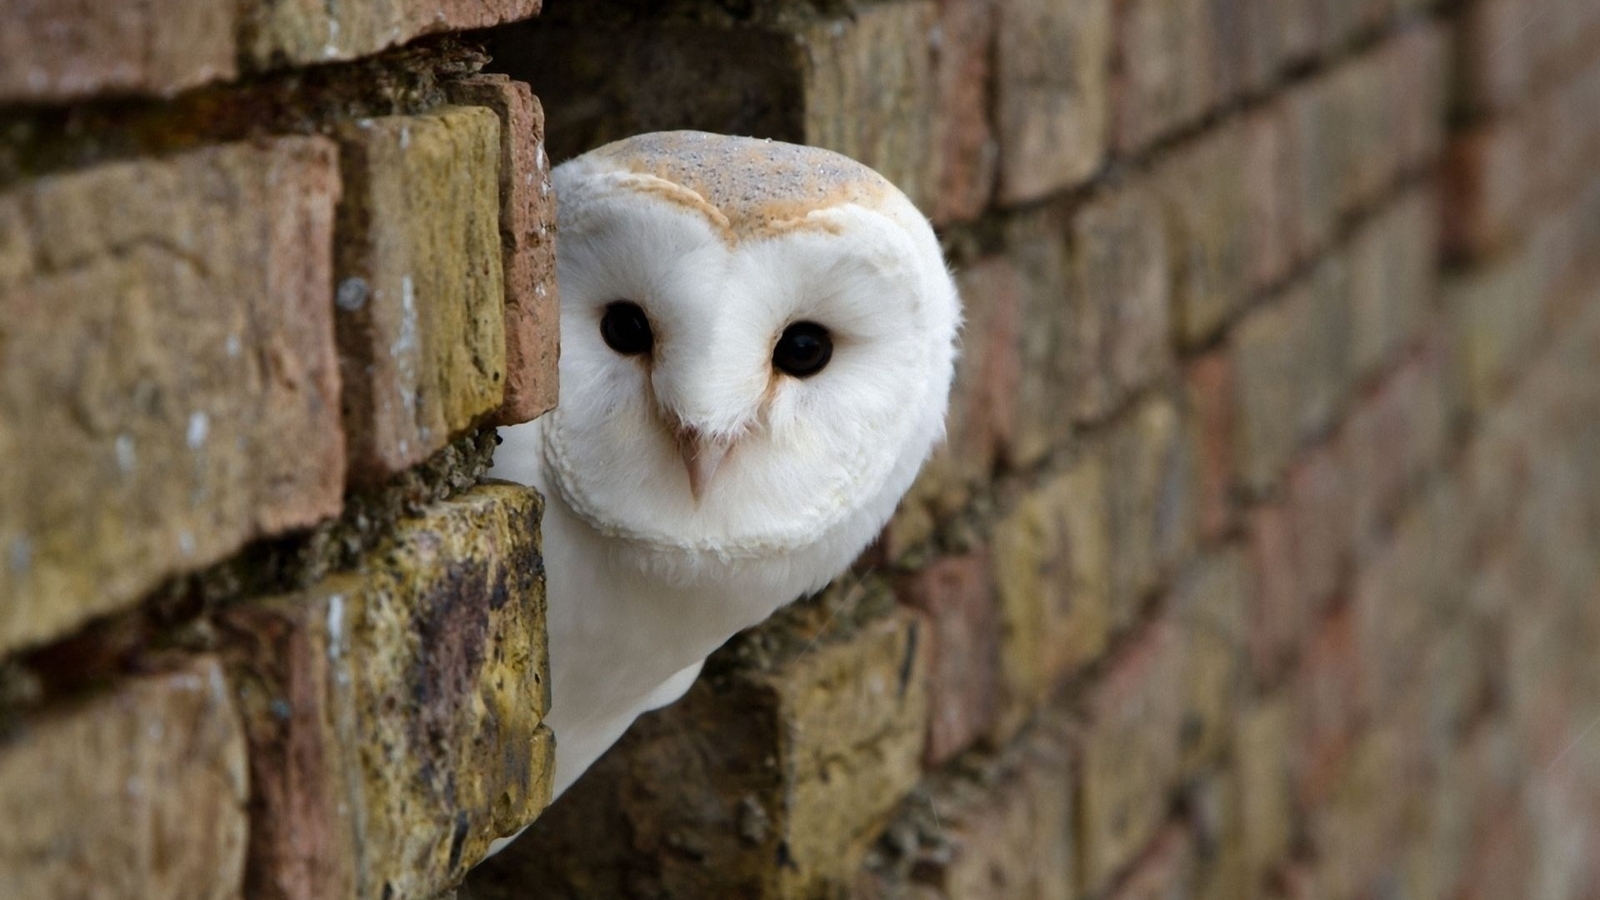 Image: Owl, head, white, looks out, brick wall